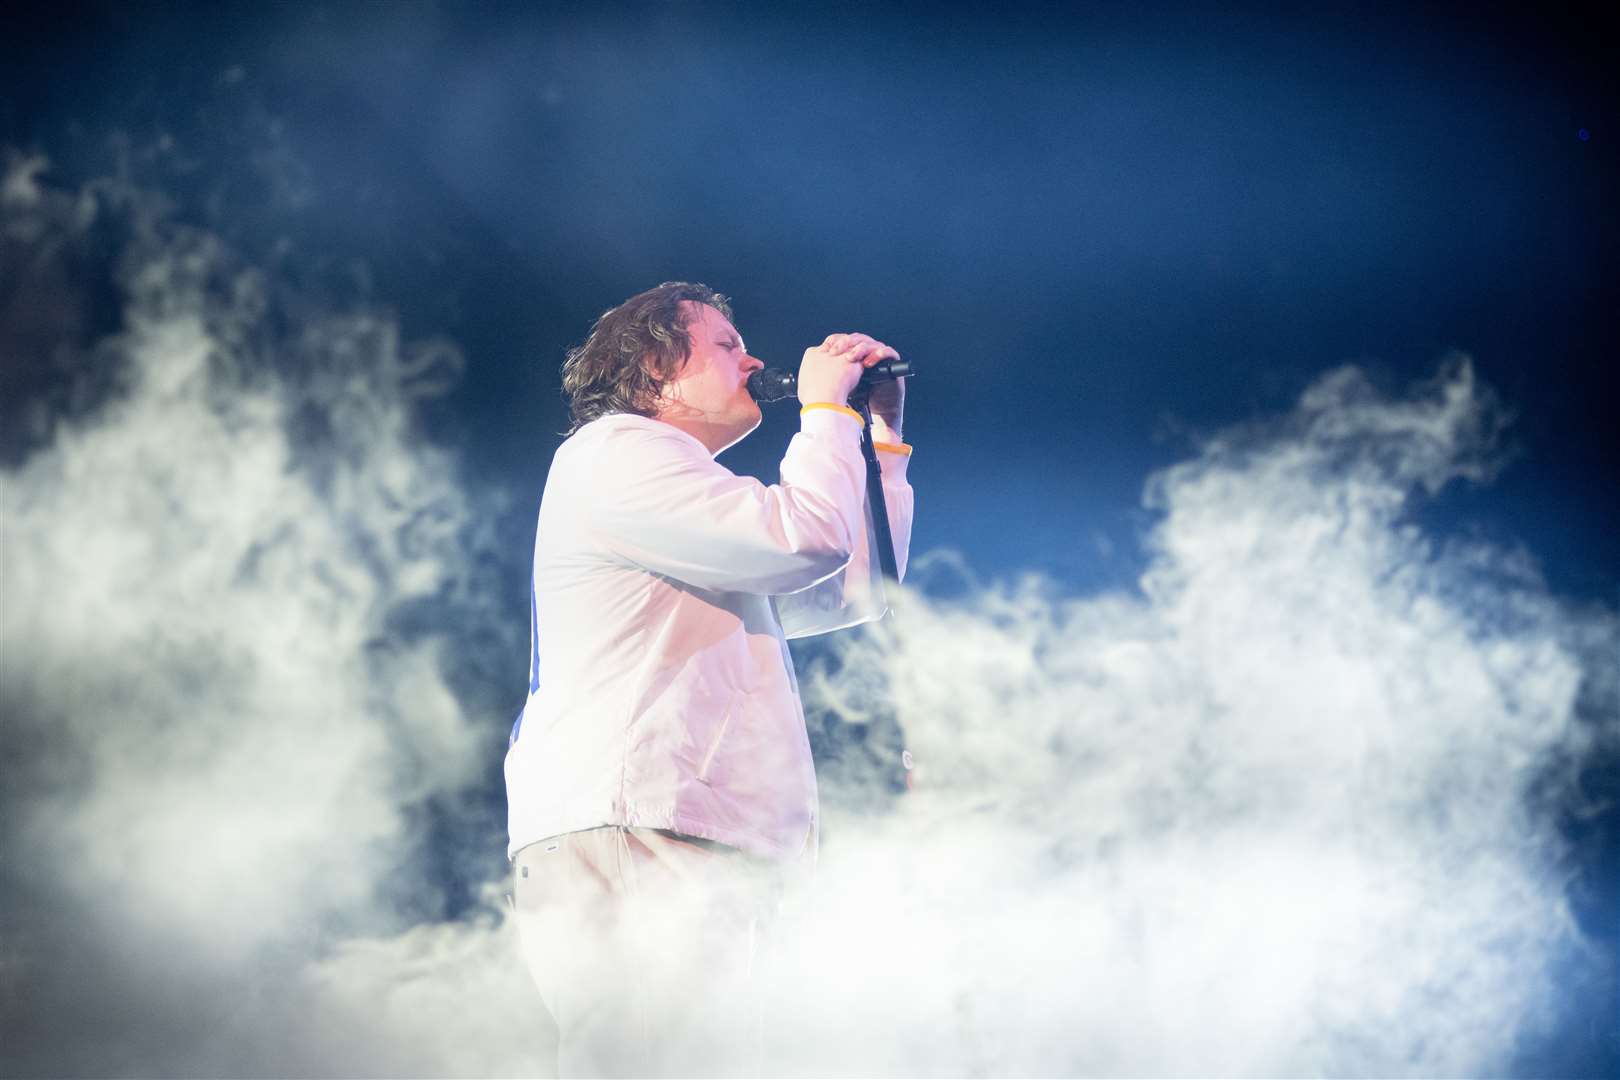 Scottish singer-songwriter Lewis Capaldi performs to a sell-out crowd at Aberdeen's P&J Live arena as part of his UK tour. ..Picture: Daniel Forsyth..